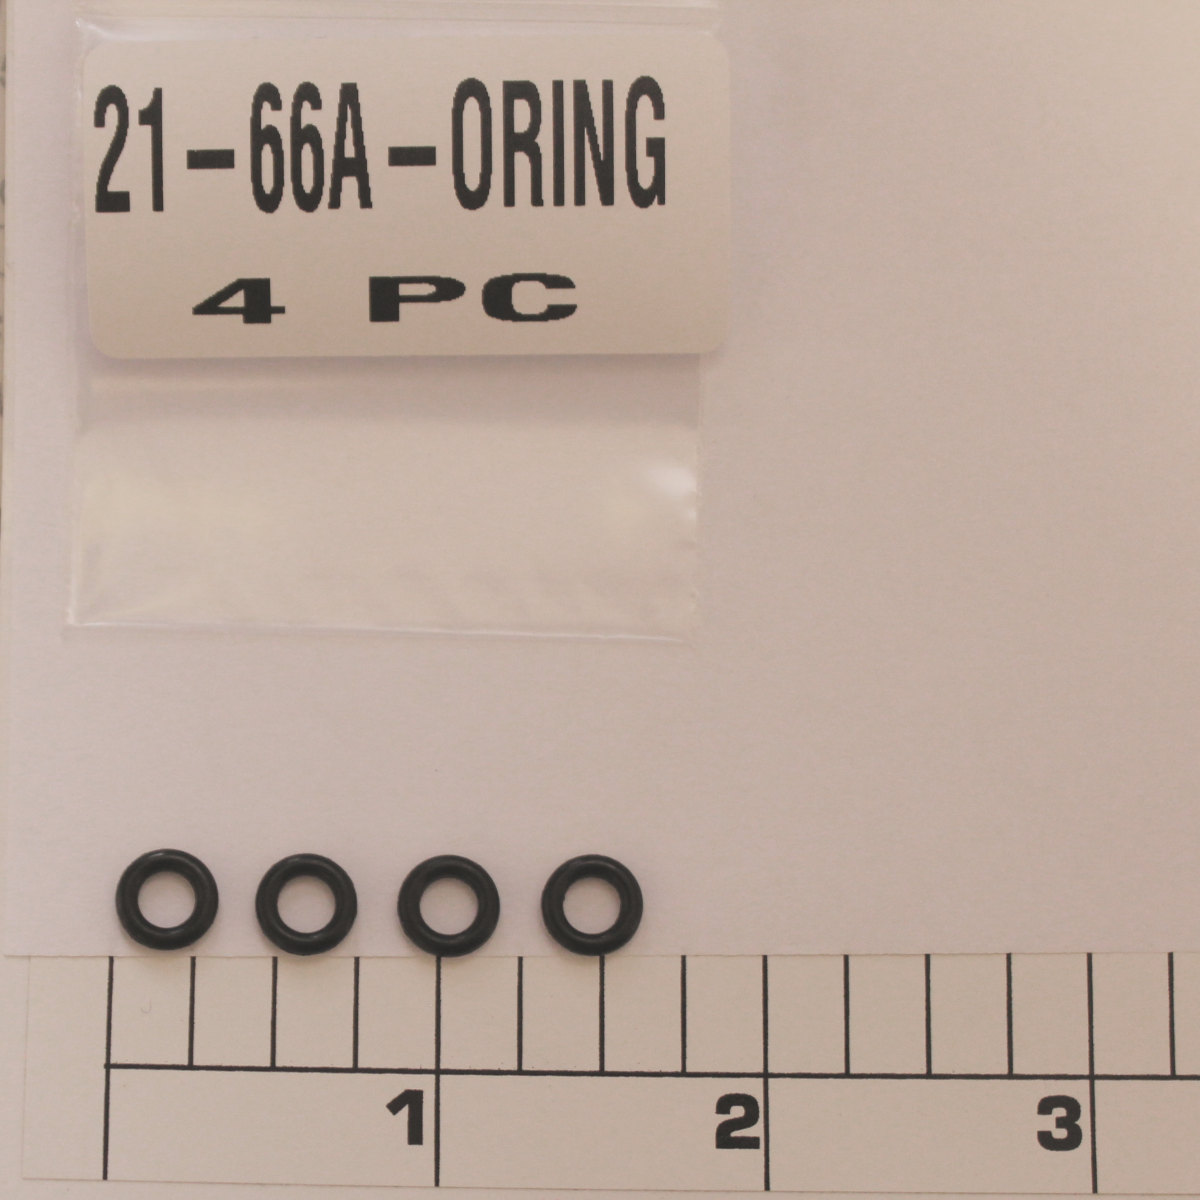 21-66A-ORING O-ring for the Custom Lever (4pk)